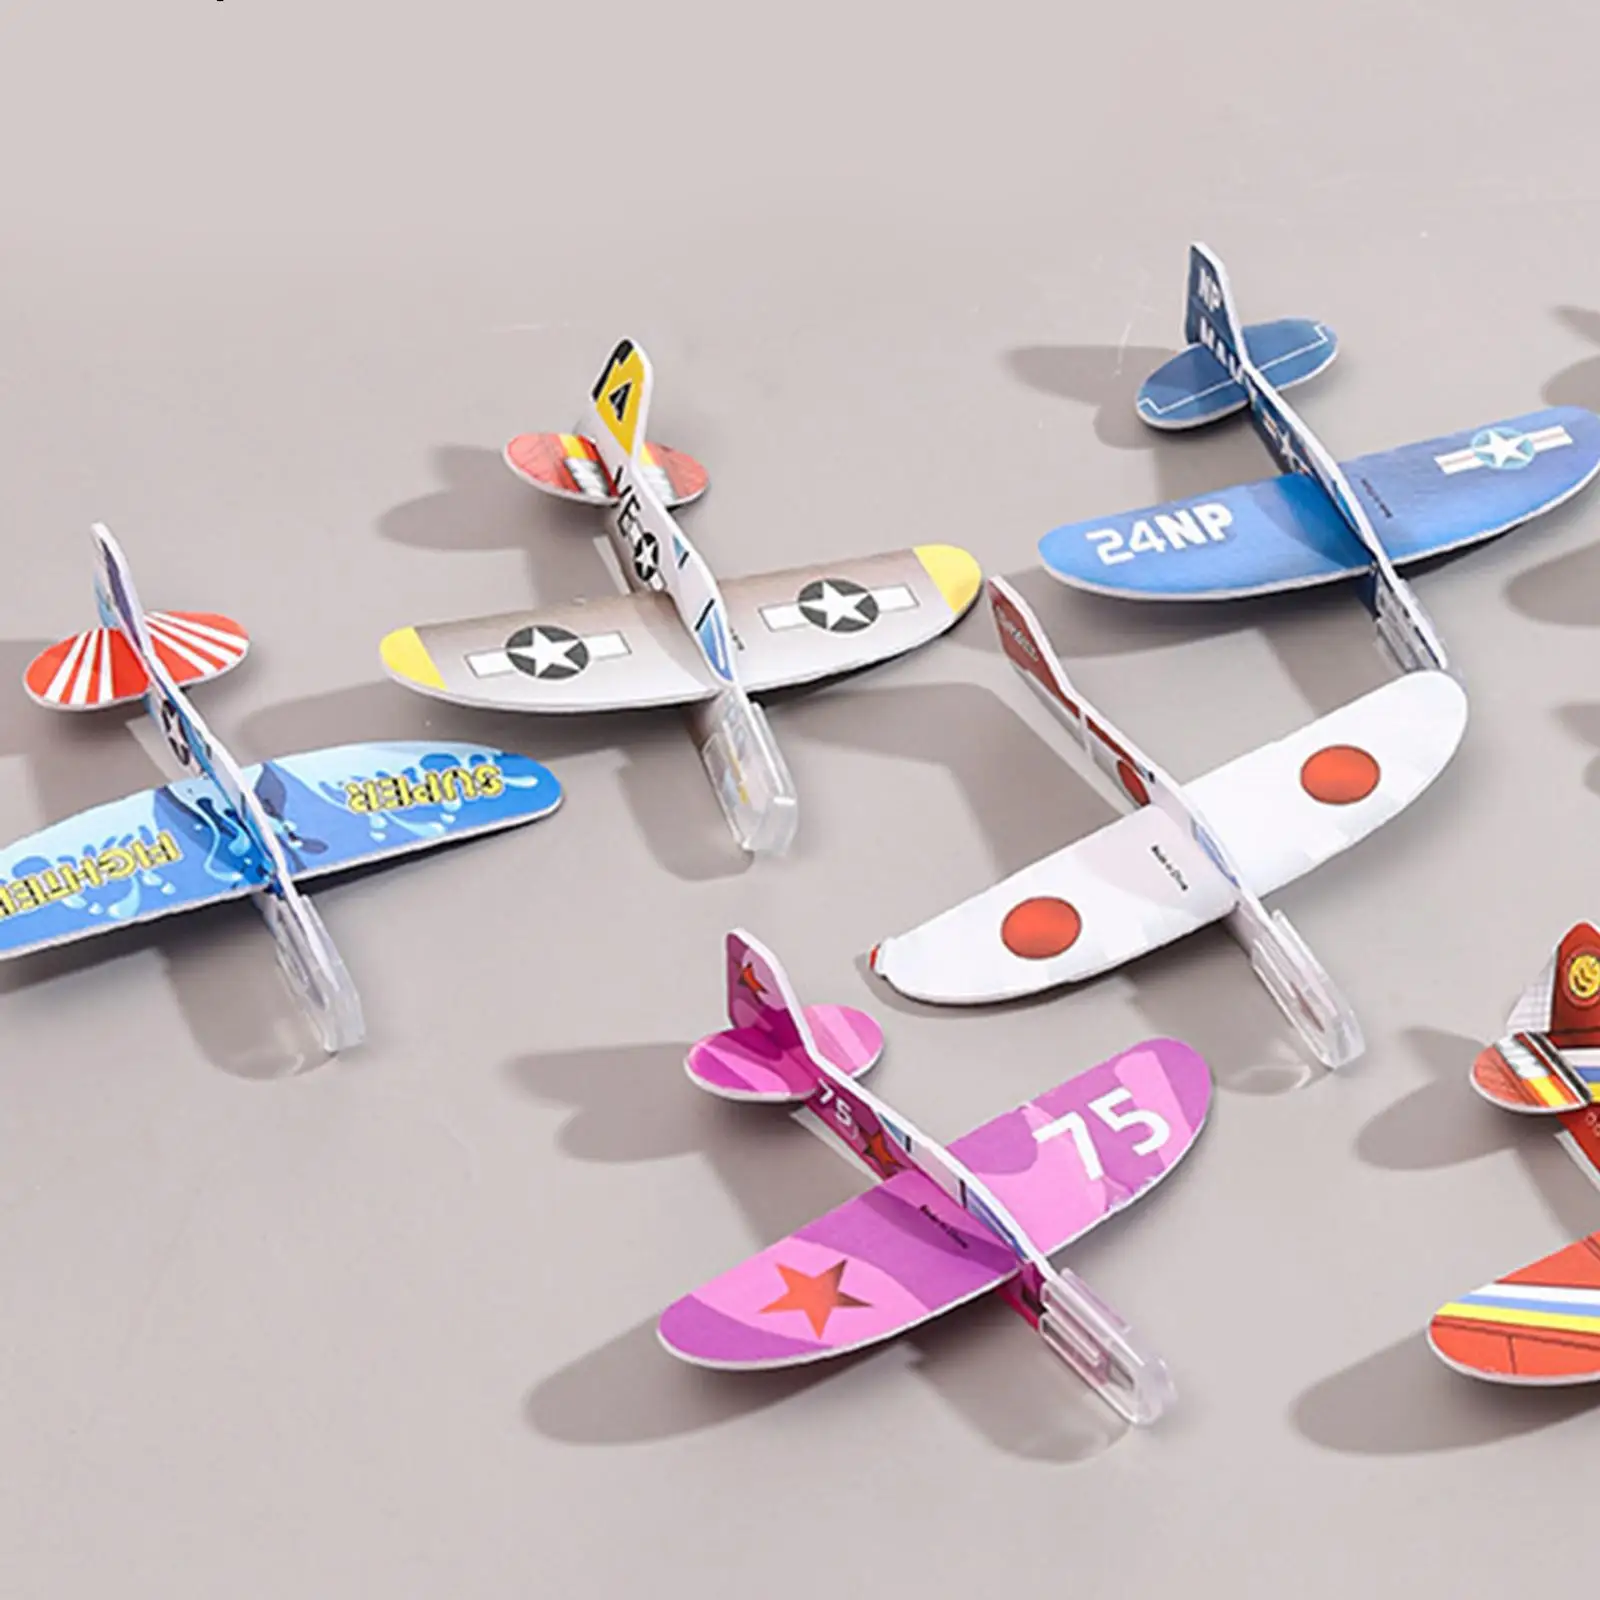 

5Pcs Kids Foam Gliders Planes Toys Hand Thrown Small Plane Throwing Foam Plane Mini Foam Airplane for Toddlers Girls Prizes Gift